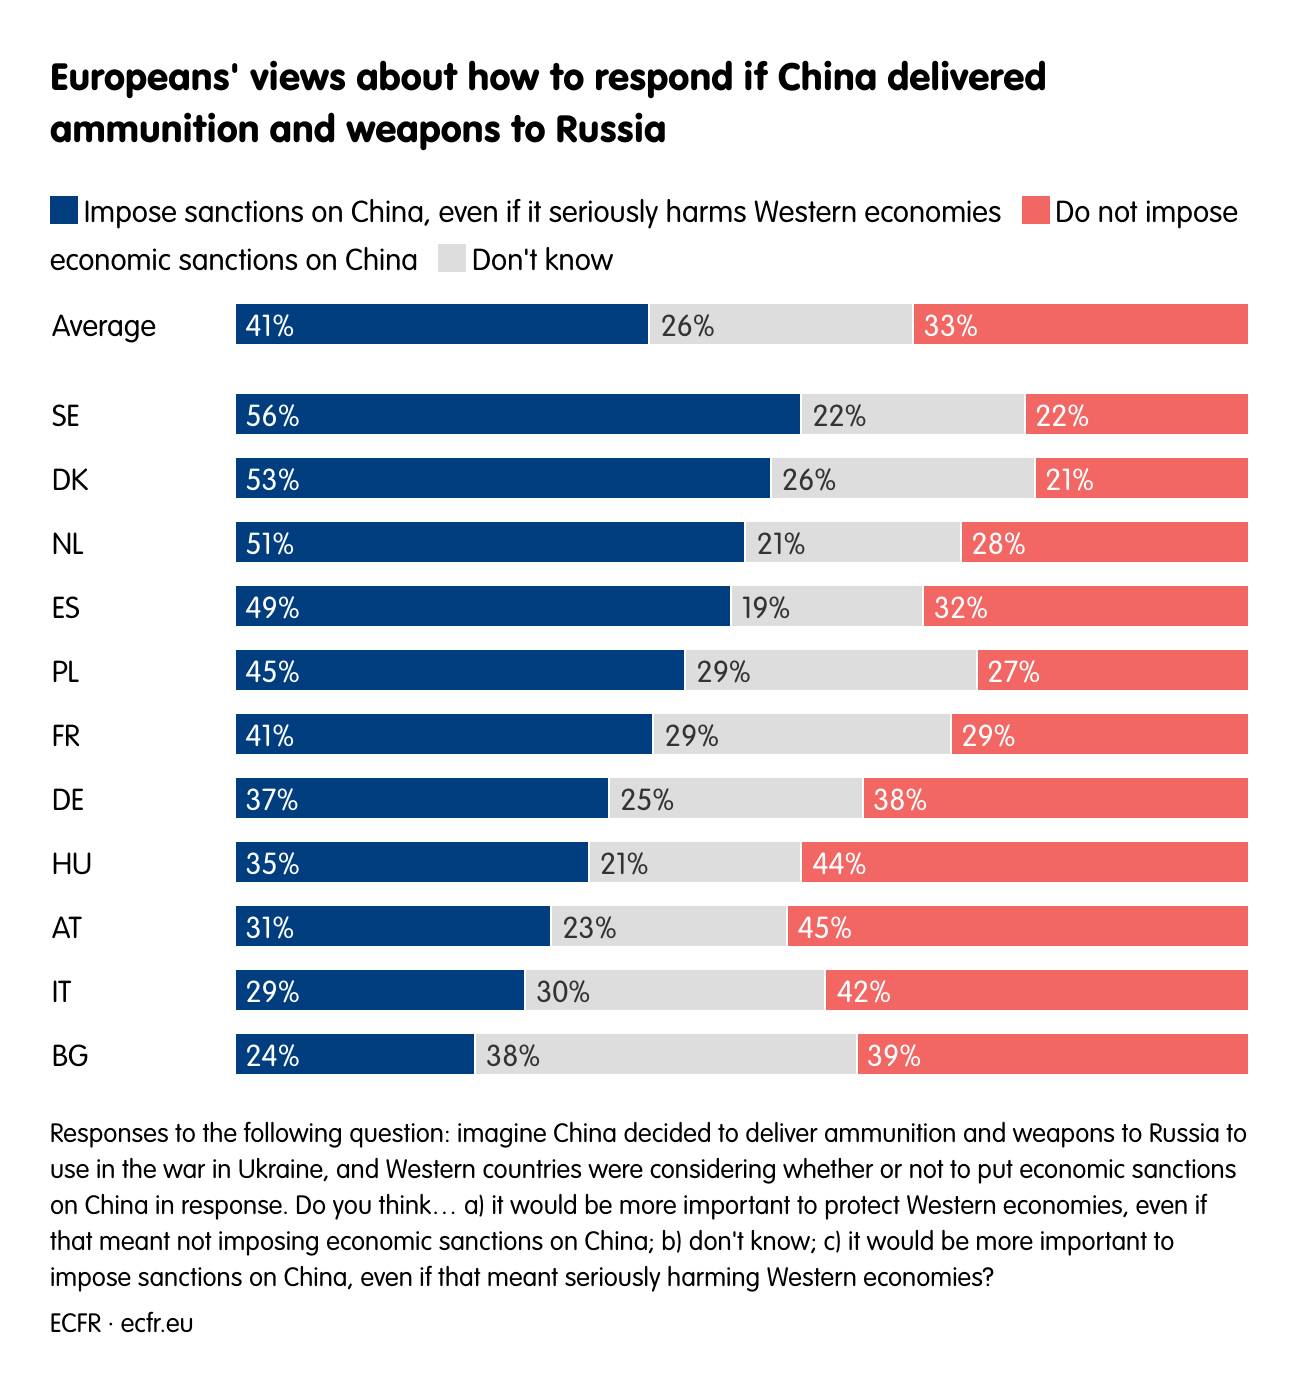 Europeans' views about how to respond if China delivered ammunition and weapons to Russia